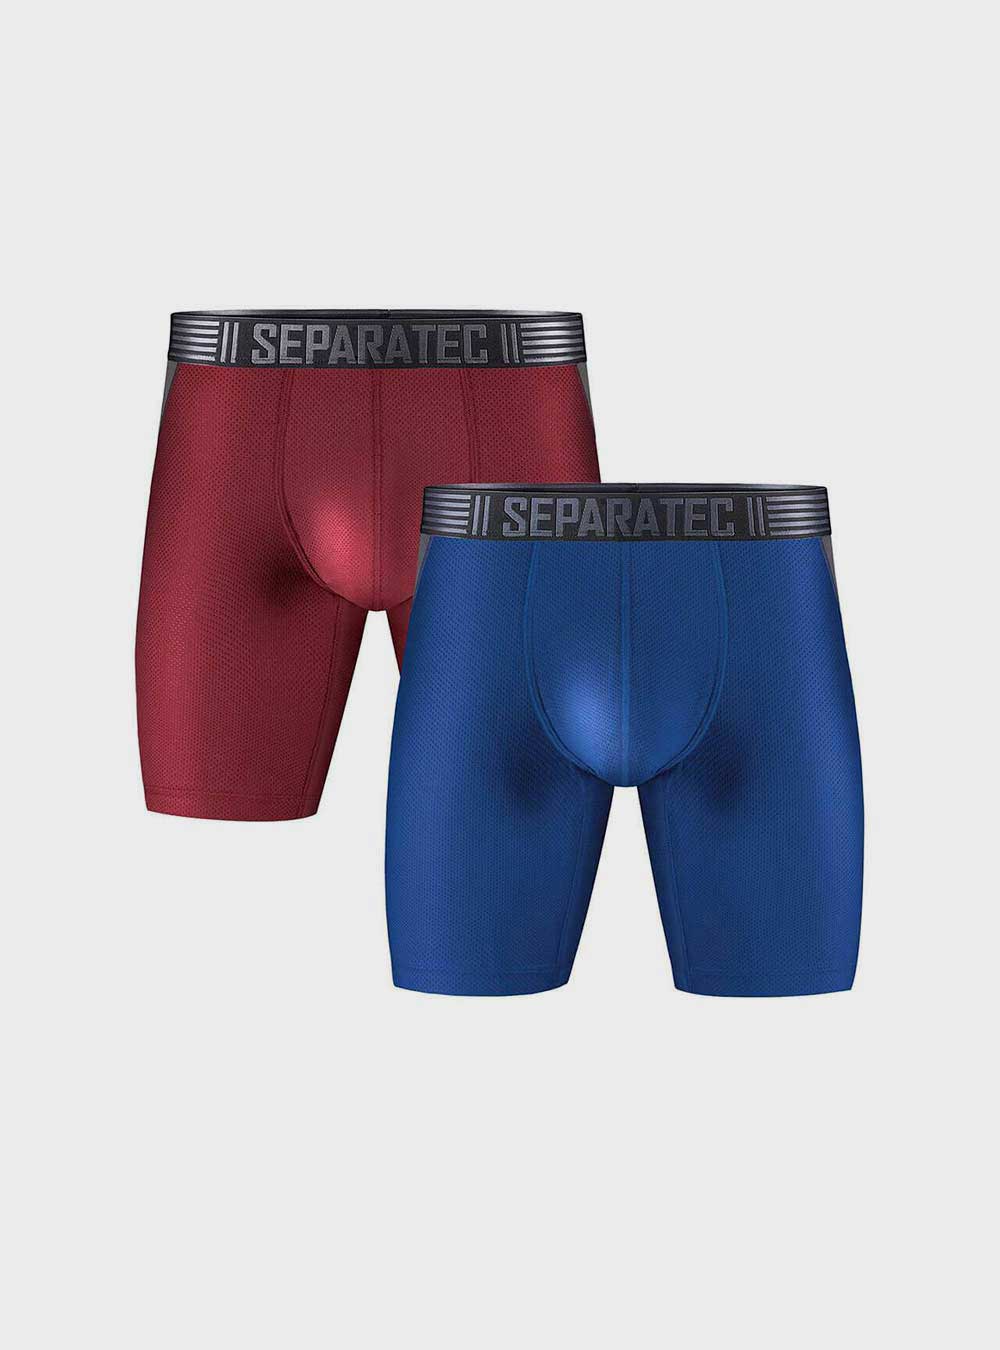 Separatec Dual Pouch Quick Dry 8 Inch Cool Mesh Sports Boxer Briefs